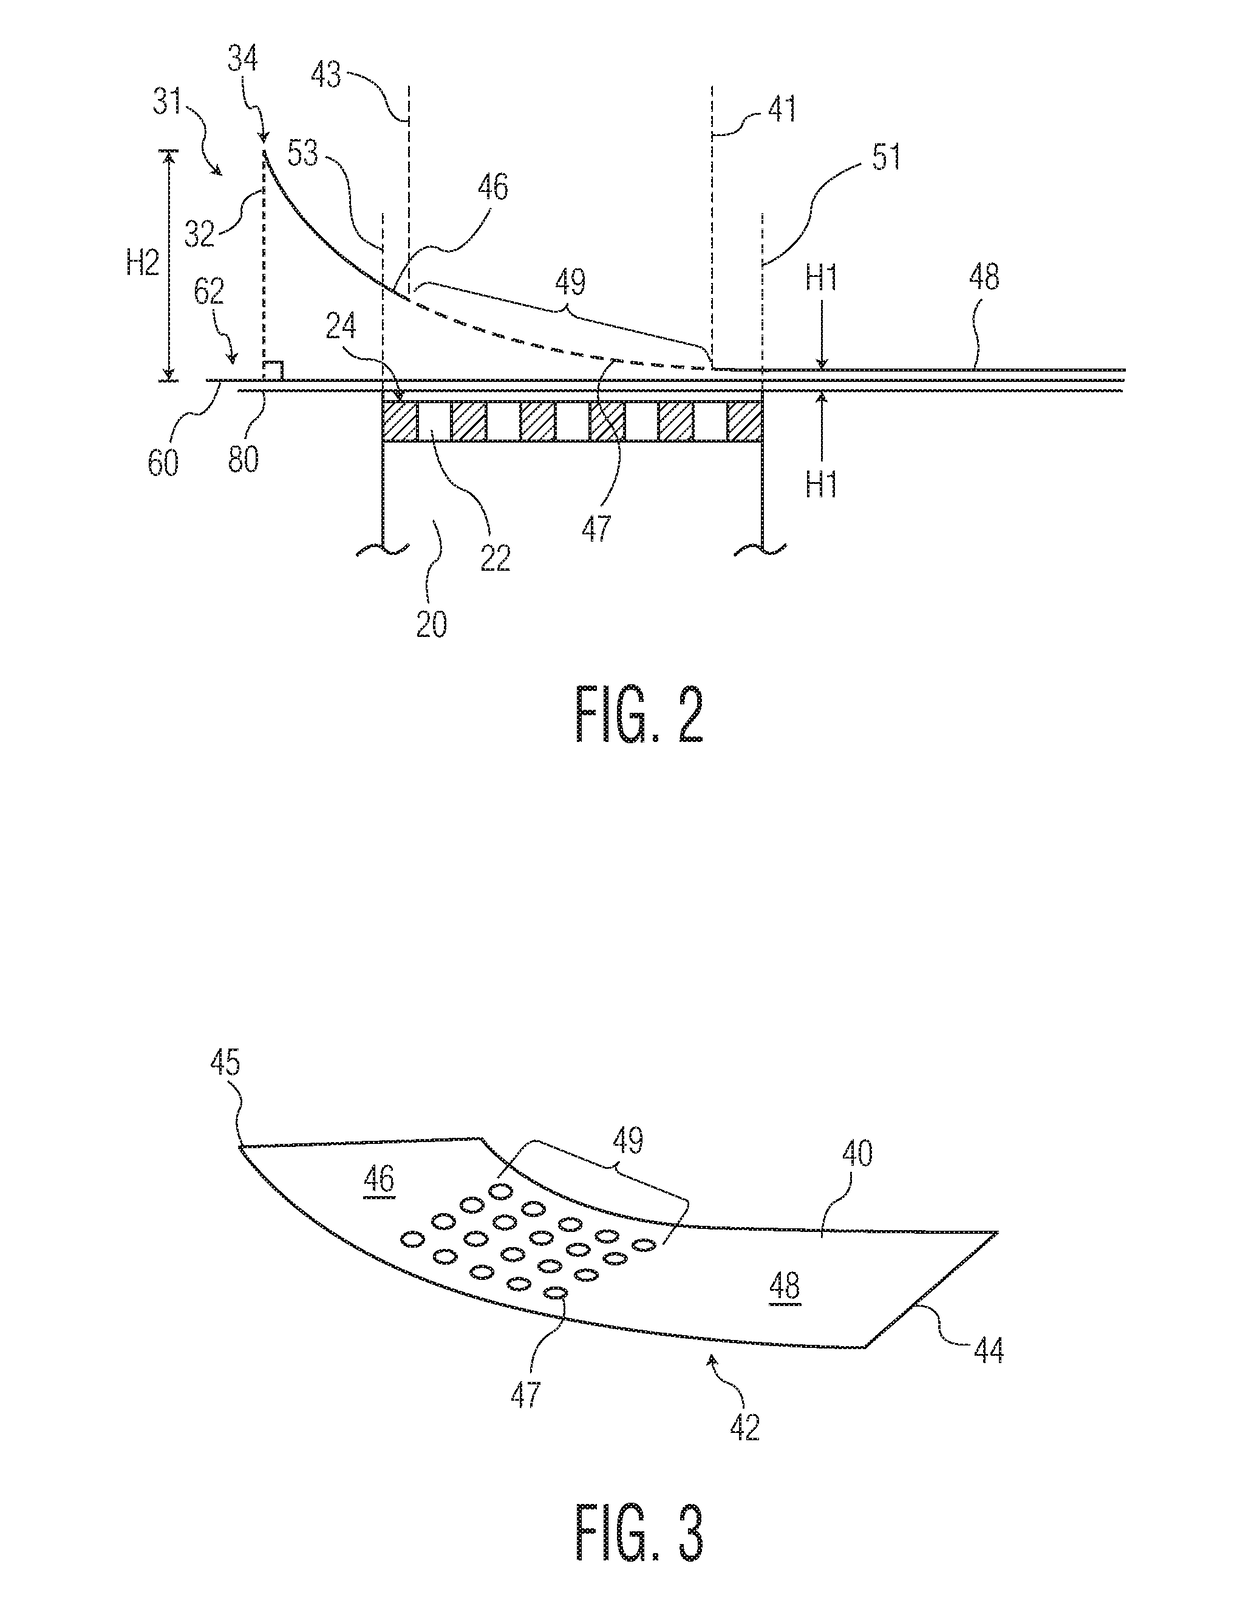 Fibrous web dewatering appartus and method